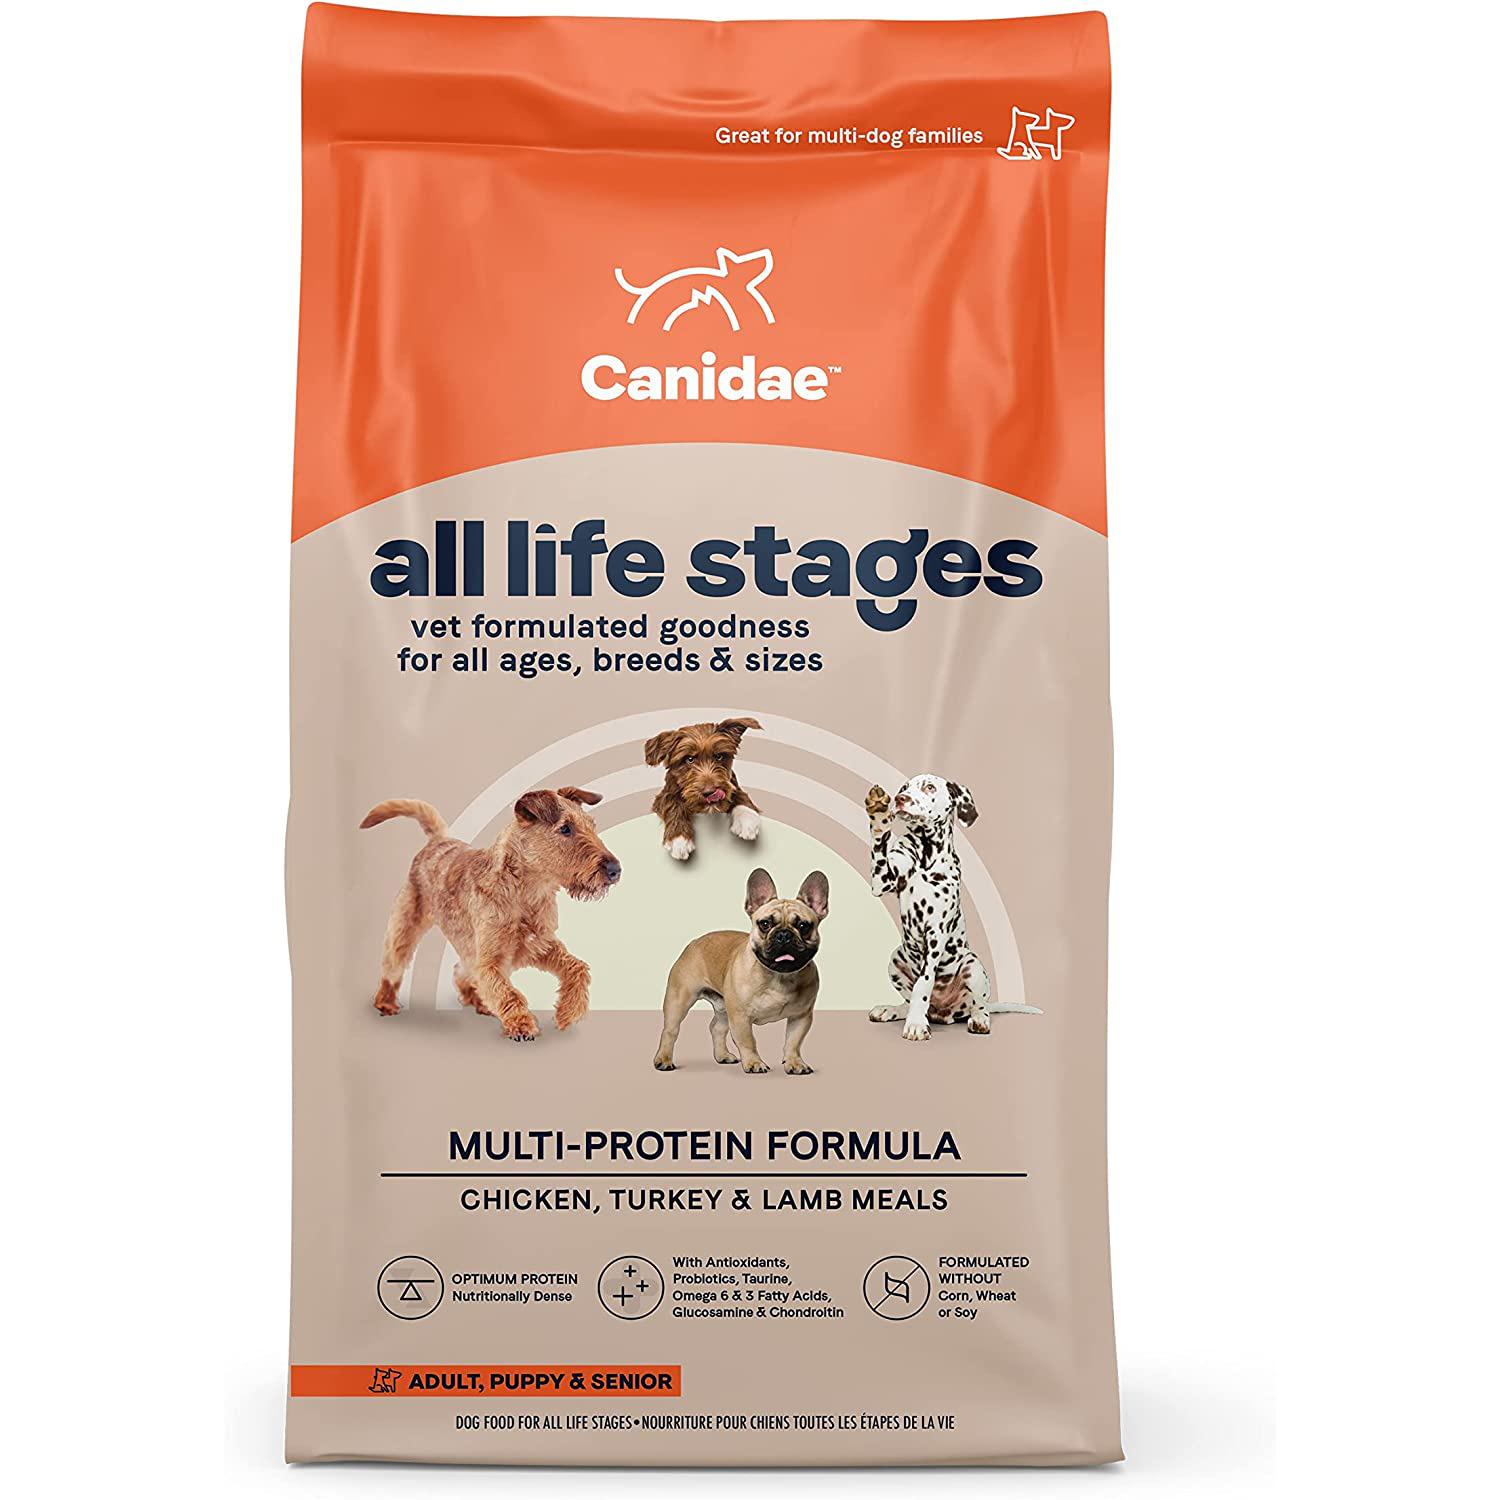 Canidae All Life Stages Premium Dry Dog Food for $38.49 Shipped